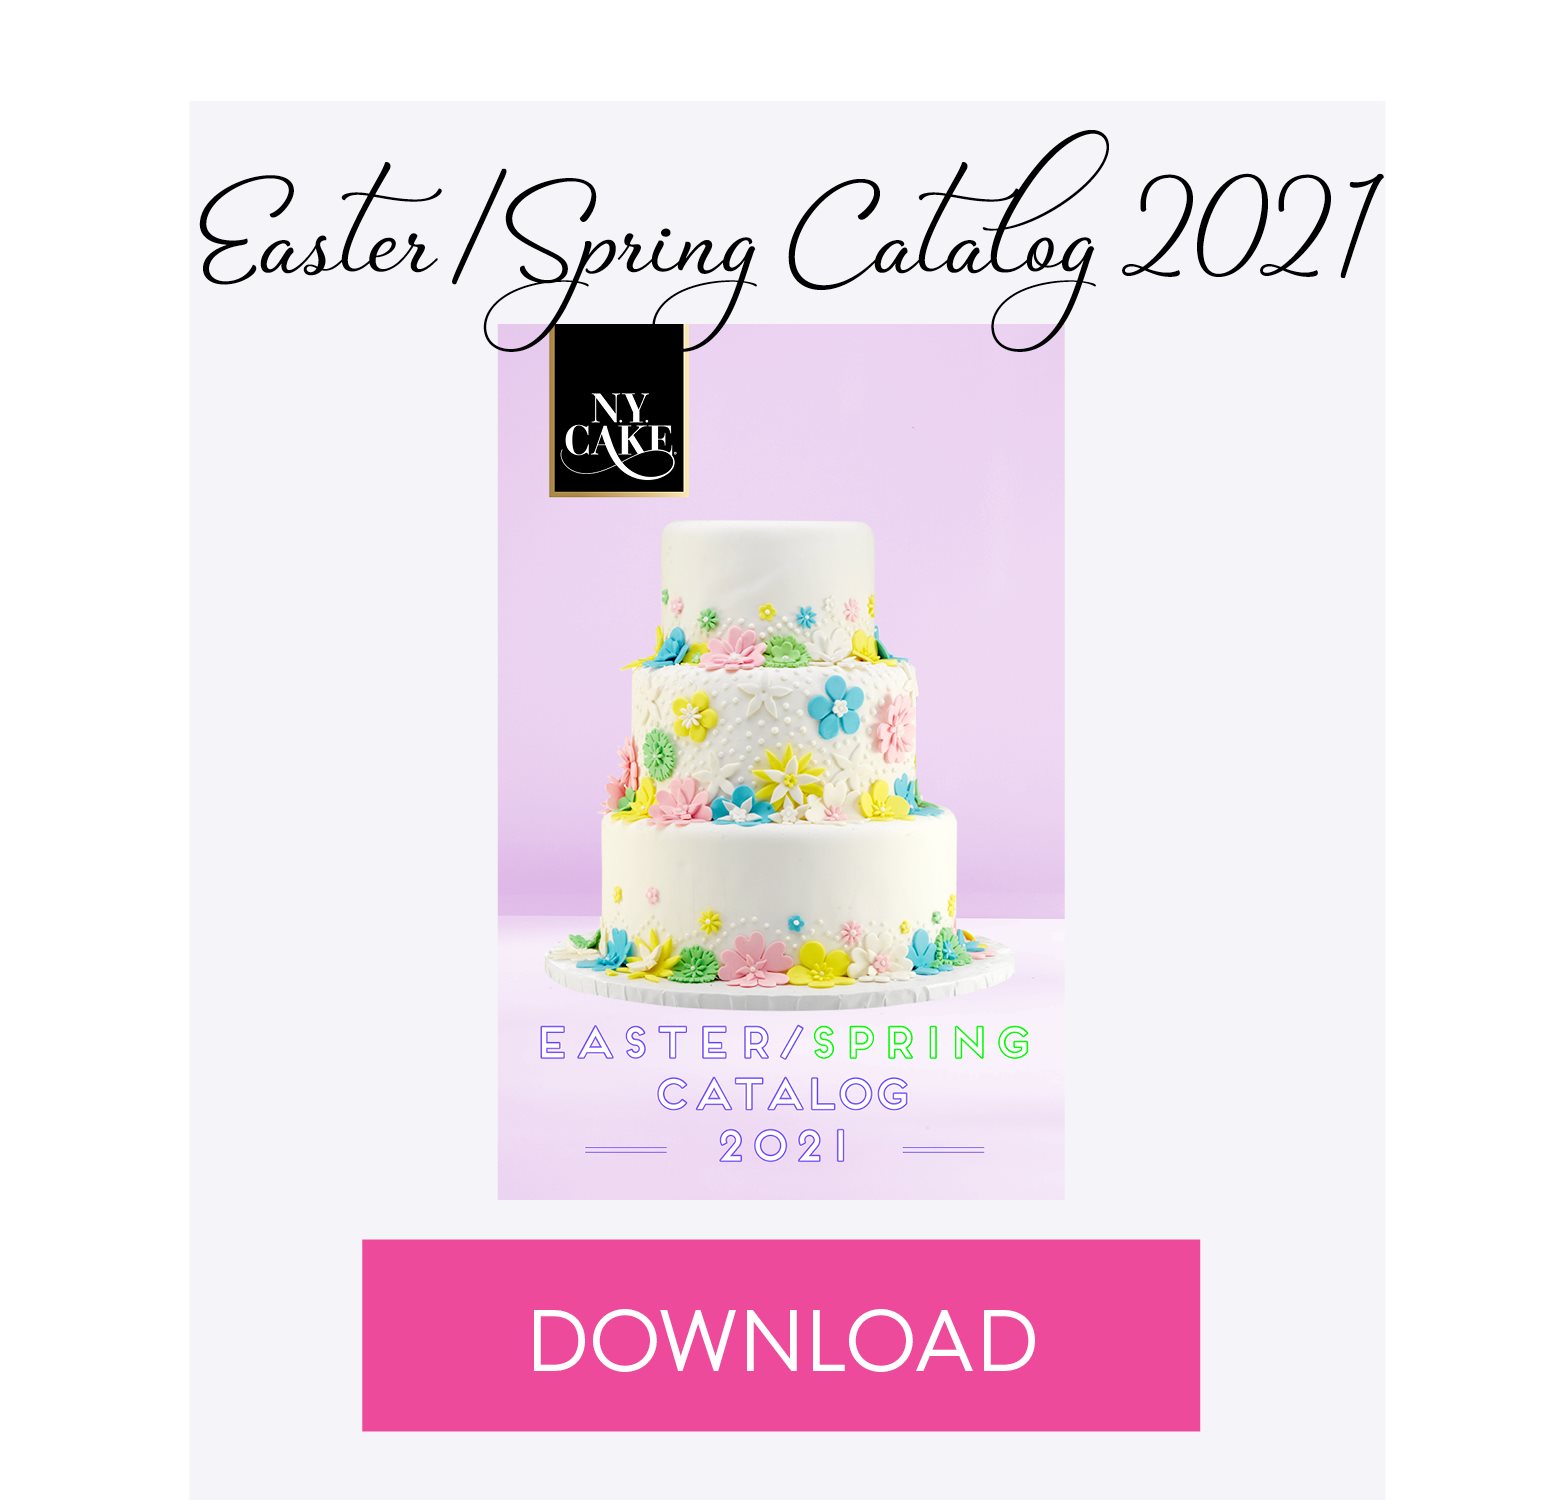 EasterSpring Catalog Button